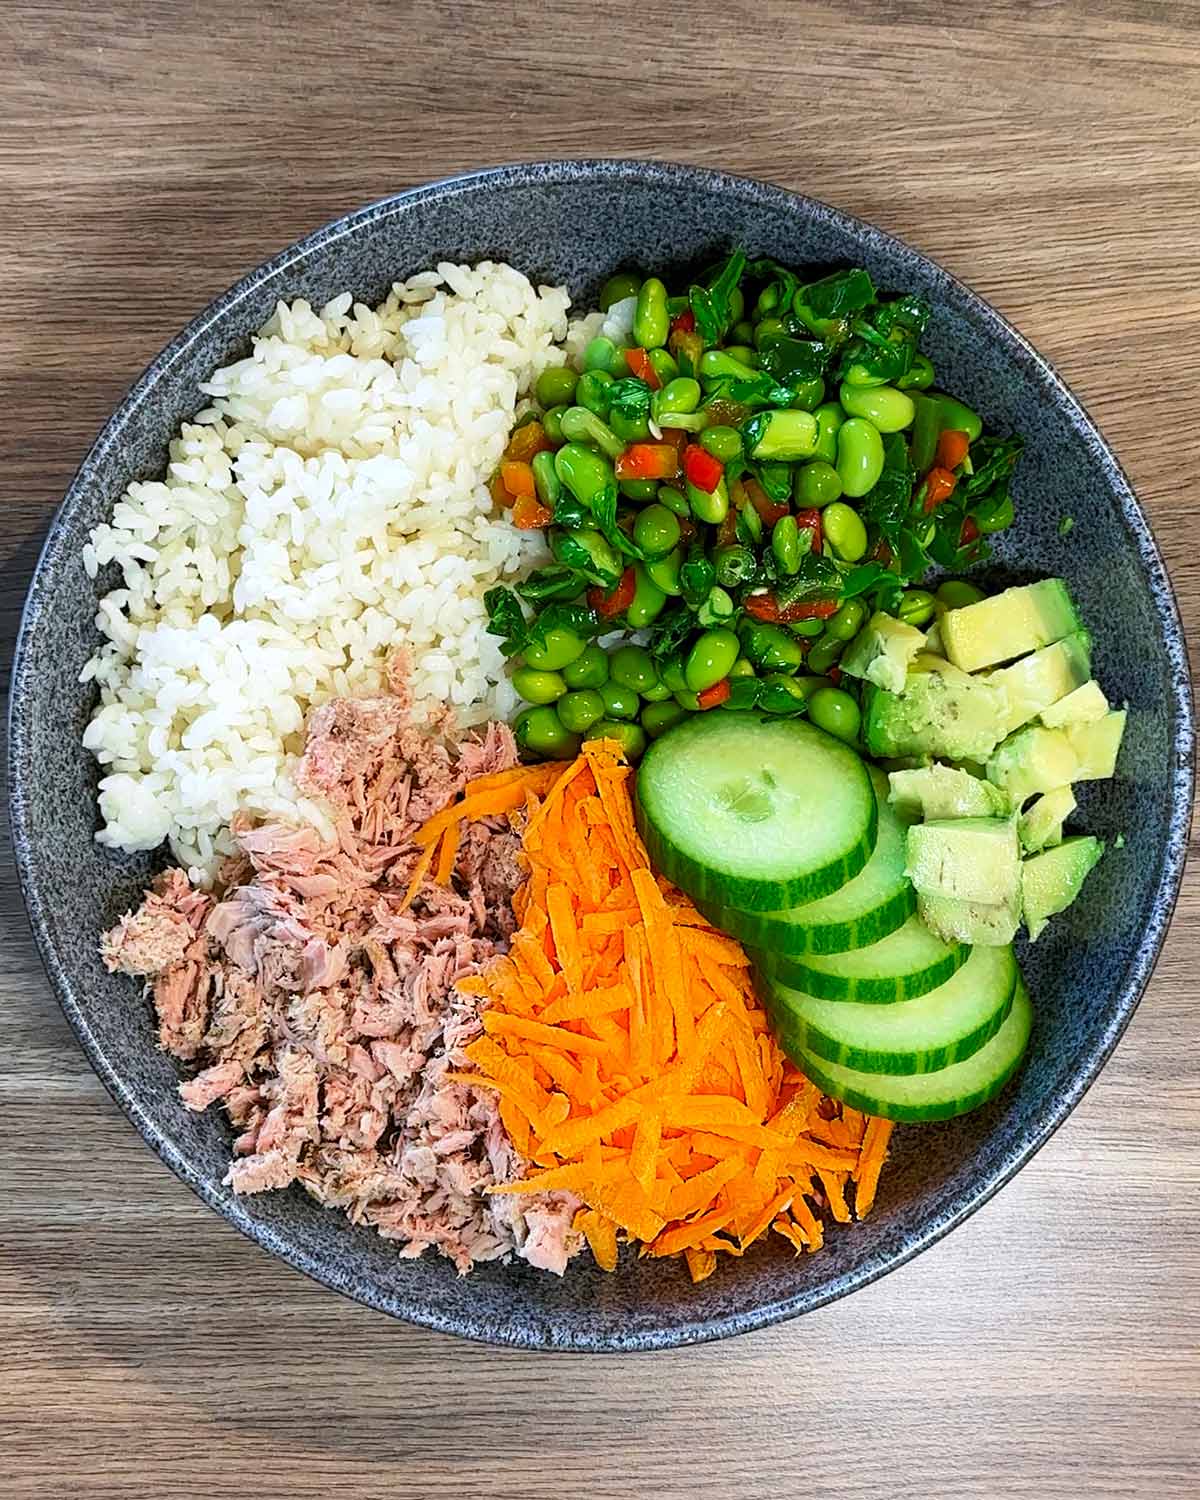 A bowl containing rice, tuna, sliced cucumber, grated carrot, avocado and edamame beans.